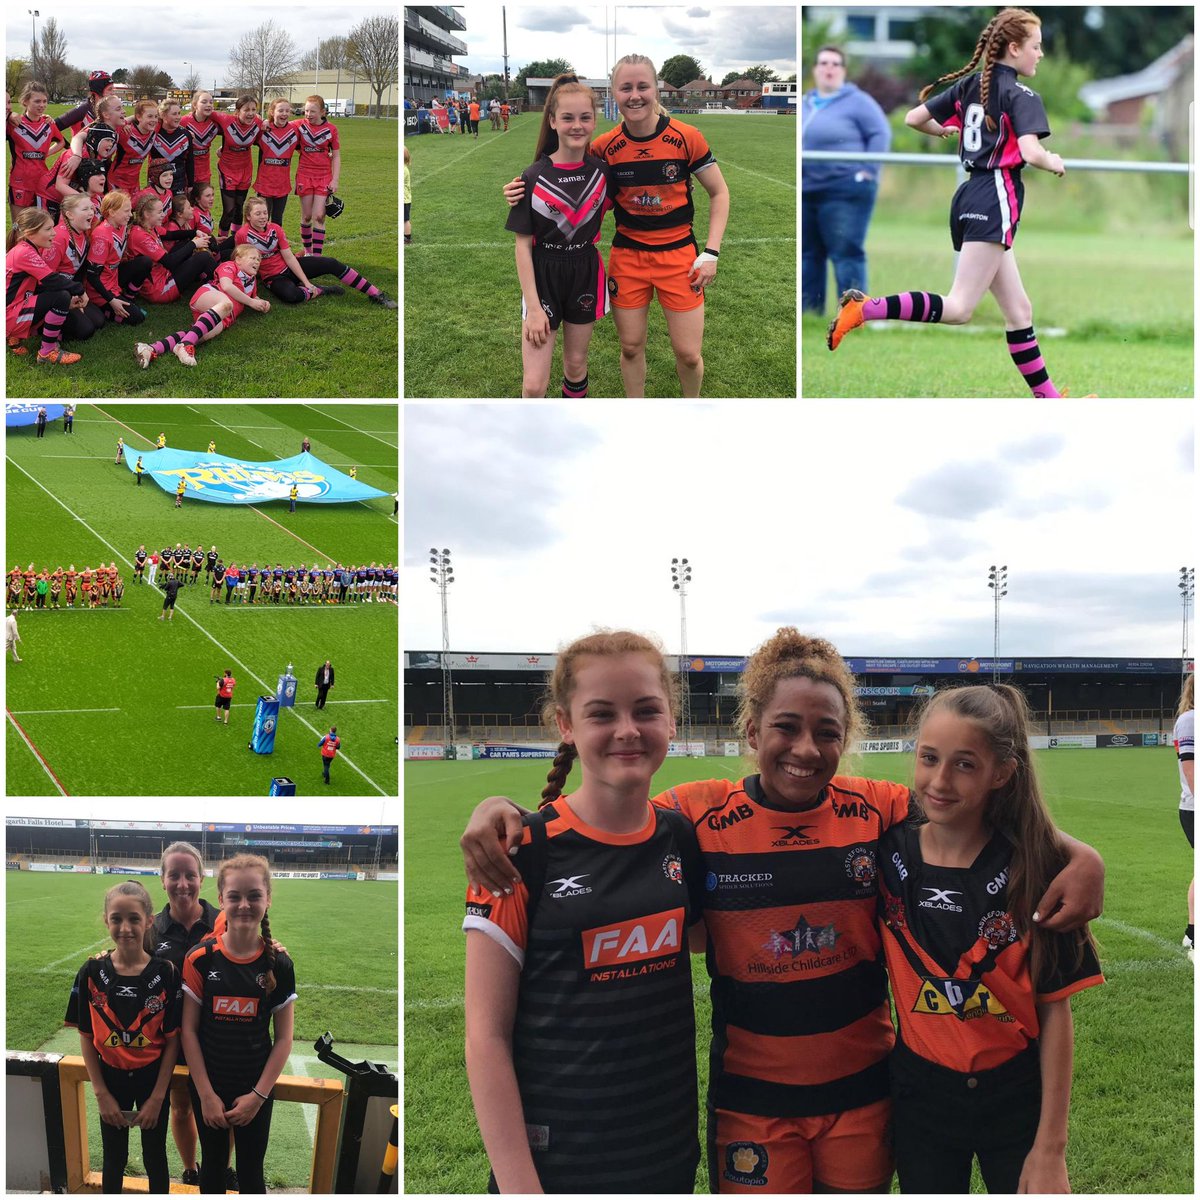 At the start of this year, I would never have imagined we would become such @CTRLFCWomen fans. I am proud of my own rugby player, and watching the ladies play has helped her game. @CRaidettes @tarajane_s1 @kelsg101 #rugbymum #rugbyleague #ladiesrugby #ladiesrugbyfan